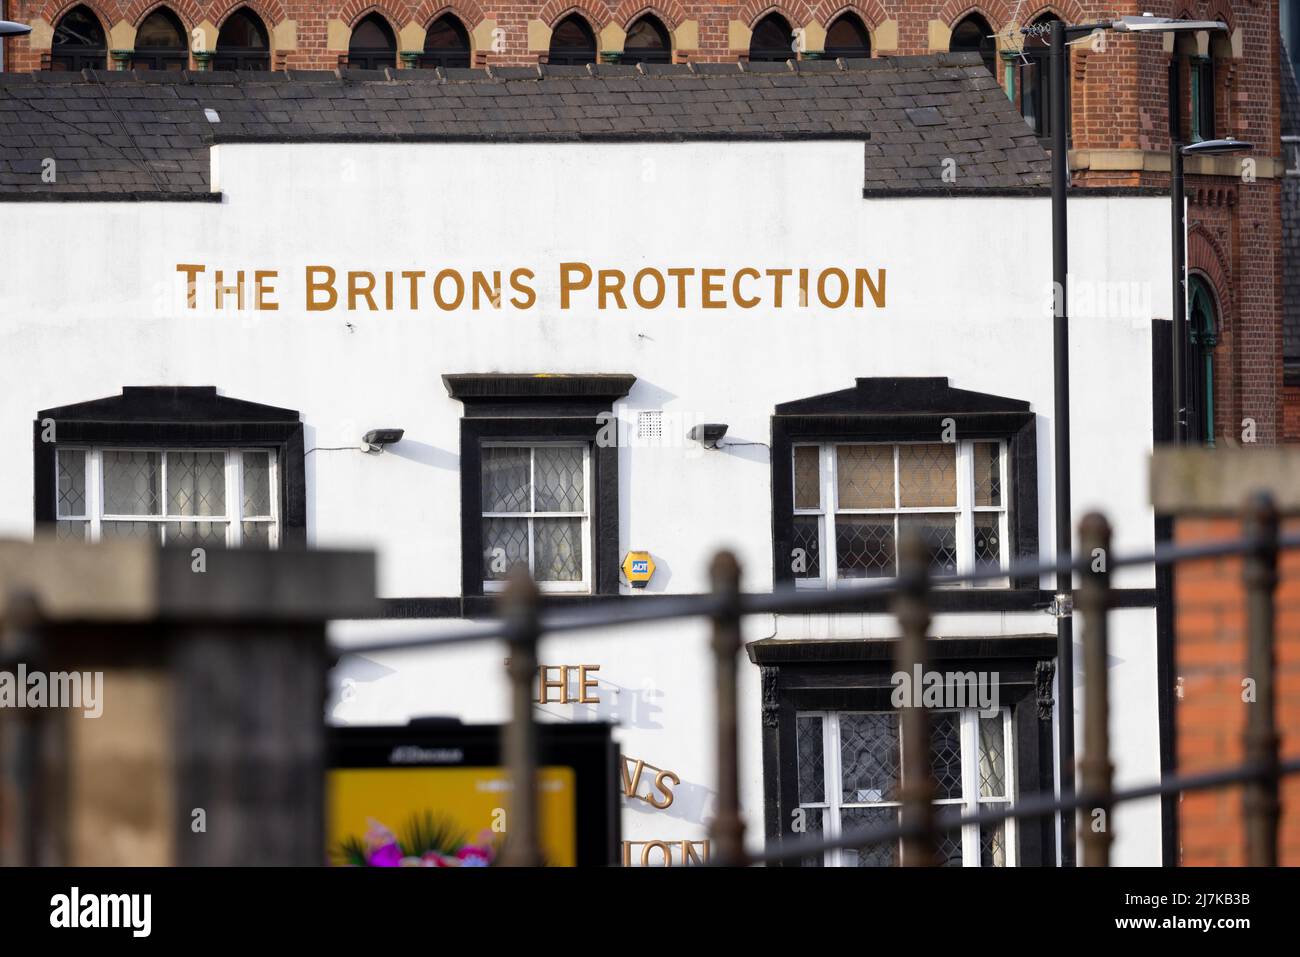 The Britons Protection Pub, Manchester. Stockfoto